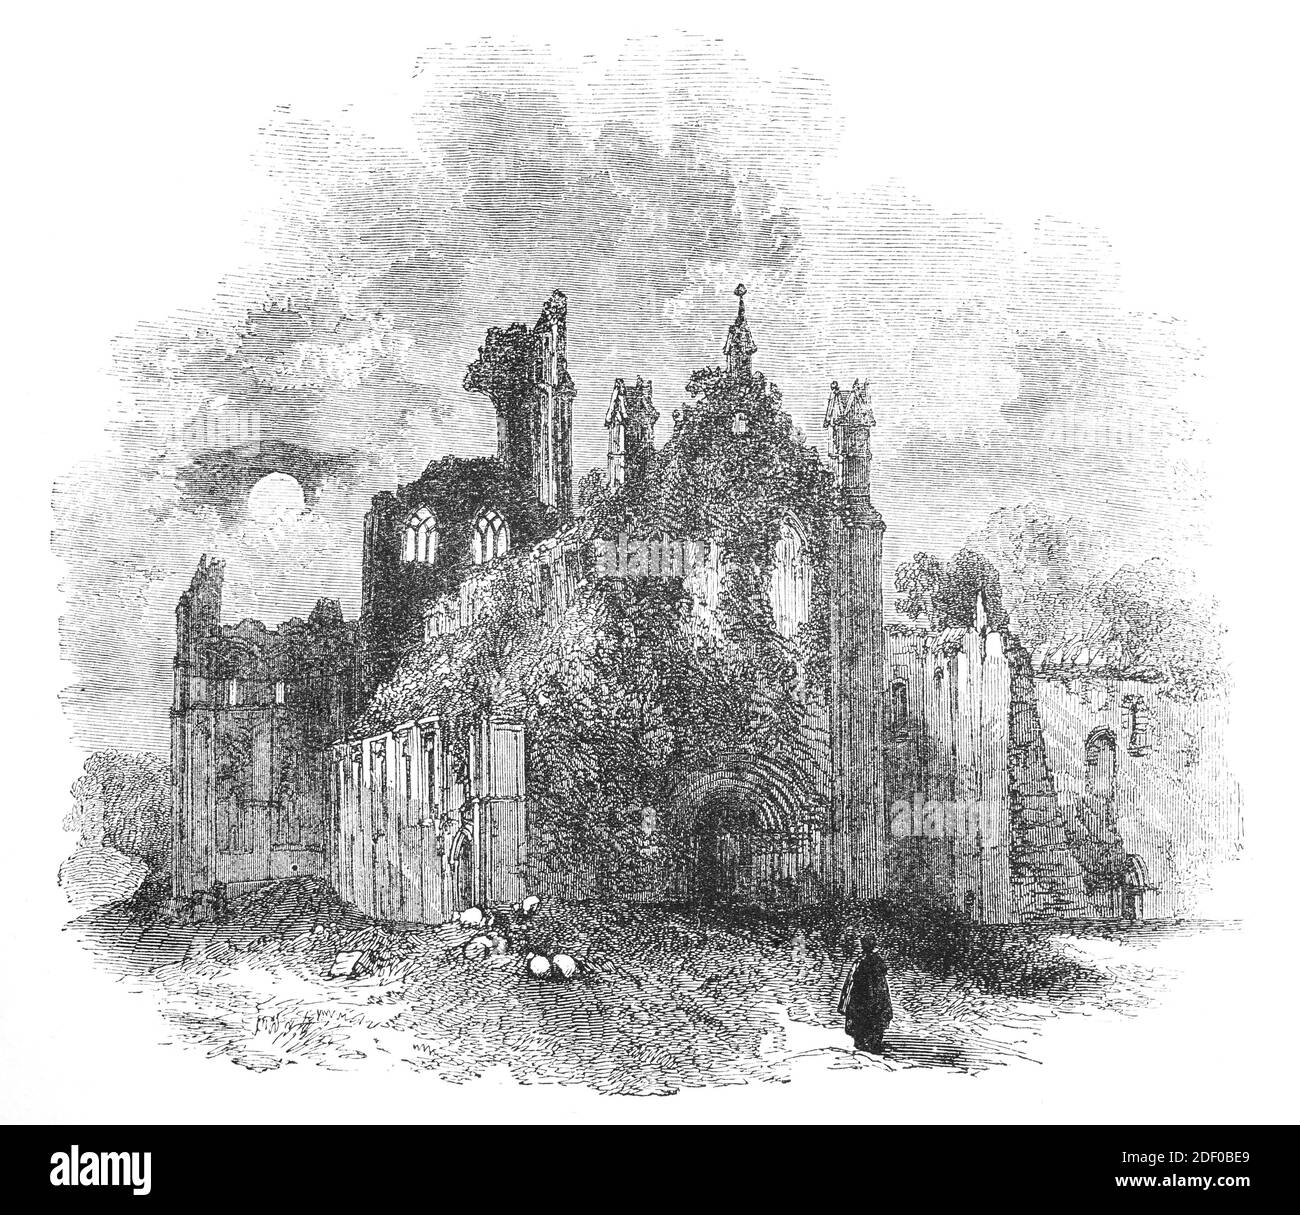 A 19th Century view of Kirkstall Abbey, a ruined Cistercian monastery in Kirkstall, in West Yorkshire, England. It was founded around 1150, and  disestablished during the Dissolution of the Monasteries under Henry VIII. The picturesque ruins have been drawn and painted by J.M.W. Turner, Thomas Girtin and John Sell Cotman. Stock Photo